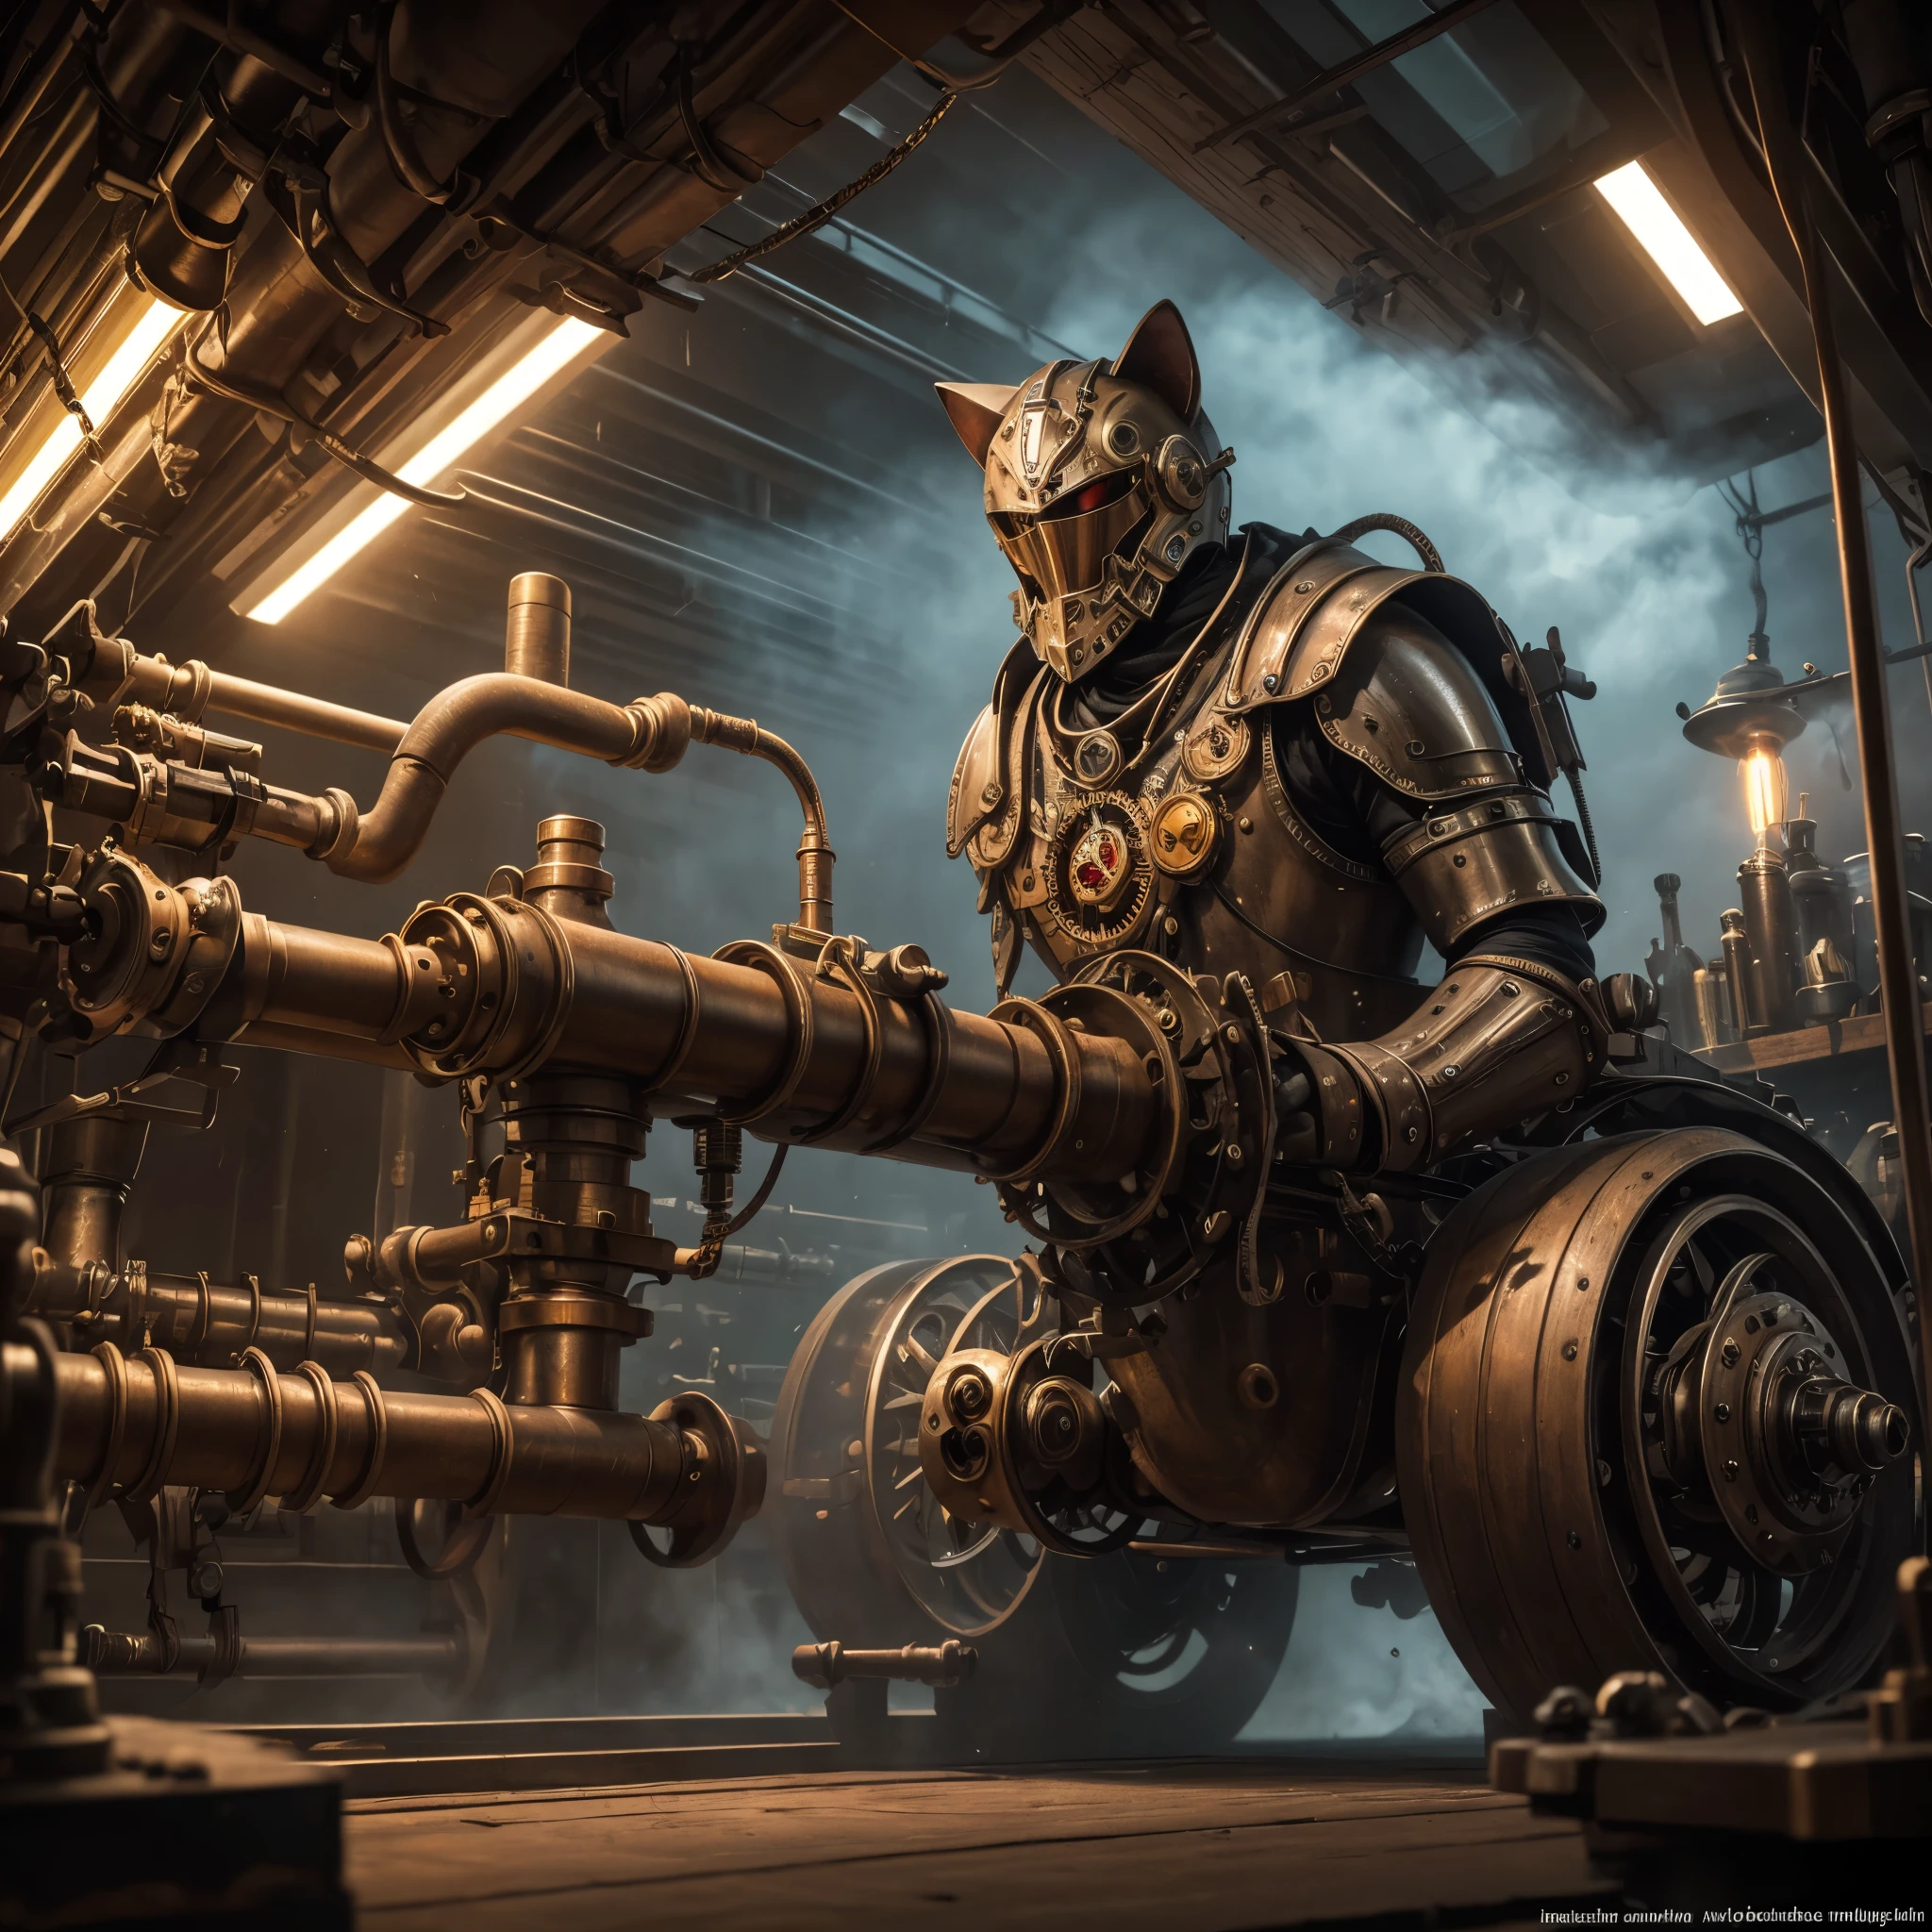 (best quality,4k,8k,highres,masterpiece:1.2),ultra-detailed,(realistic,photorealistic,photo-realistic:1.37),steampunk,cat,mechanical knight,Victorian England,chest cockpit,challenge,weapon,sword,industrial,steam-powered,metallic,ornate,engravings,automaton,gears,vintage,antique,detailed,mechanism,steering wheel,leather seats,clockwork,exquisite craftsmanship,clock gears,brass fittings,elaborate design,suit of armor,cat ears,mechanical tail,intricate,driving mechanism,adventurous atmosphere,mechanical creation,levers and switches,retro-futuristic,elegant style,mechanical precision,copper pipes,steaming vents,gauges,pistons,sparks,industrial revolution,metallic clanking,duel,steam-powered locomotion,steely determination,vivid colors,soft lighting